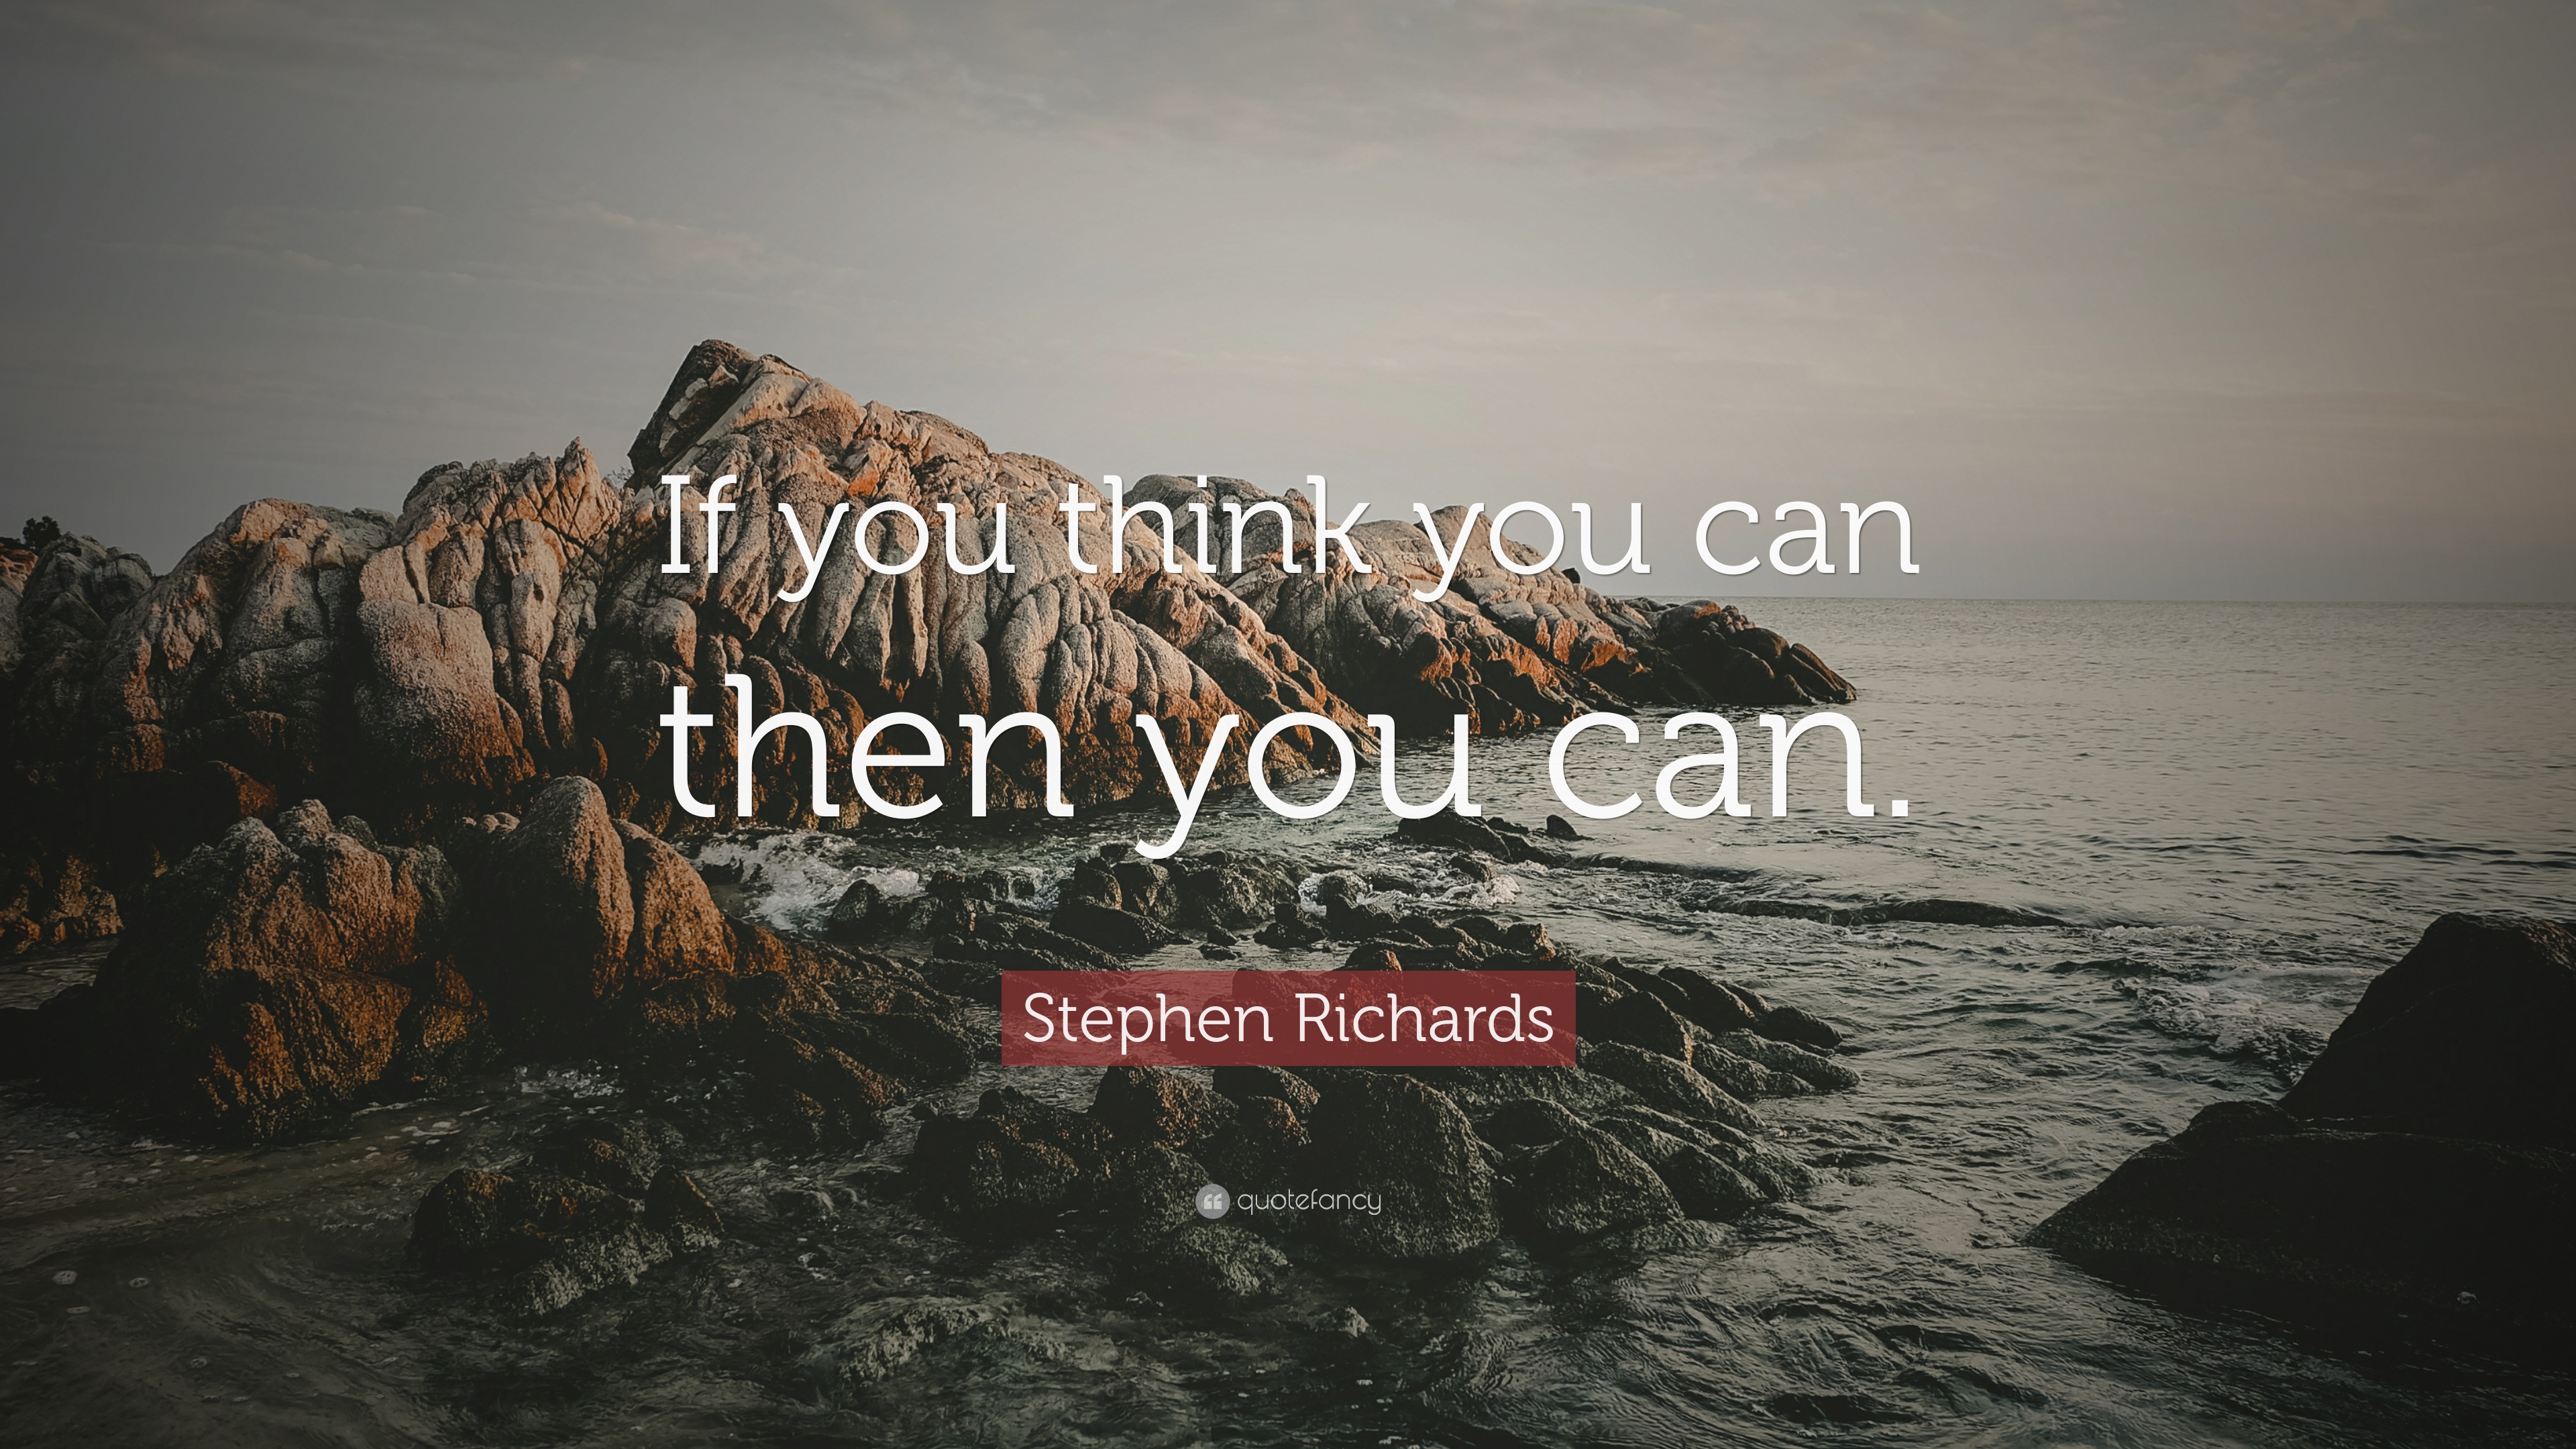 You Can If You Think You Can - Wallpaper Quote